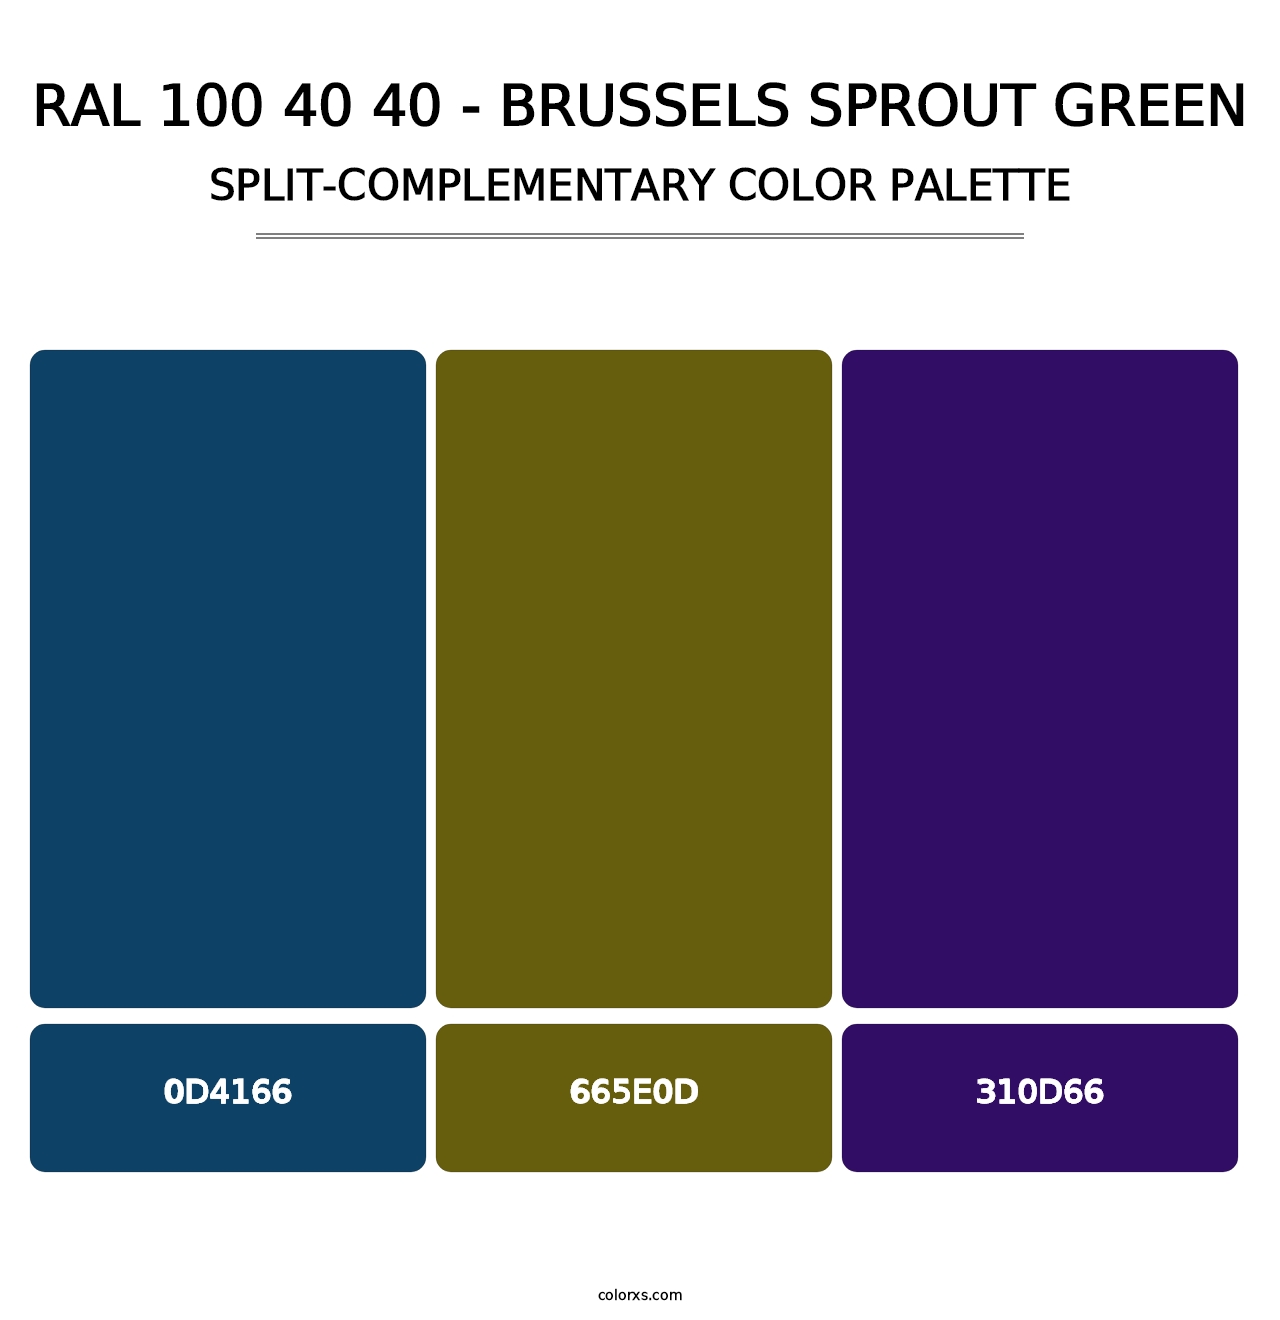 RAL 100 40 40 - Brussels Sprout Green - Split-Complementary Color Palette